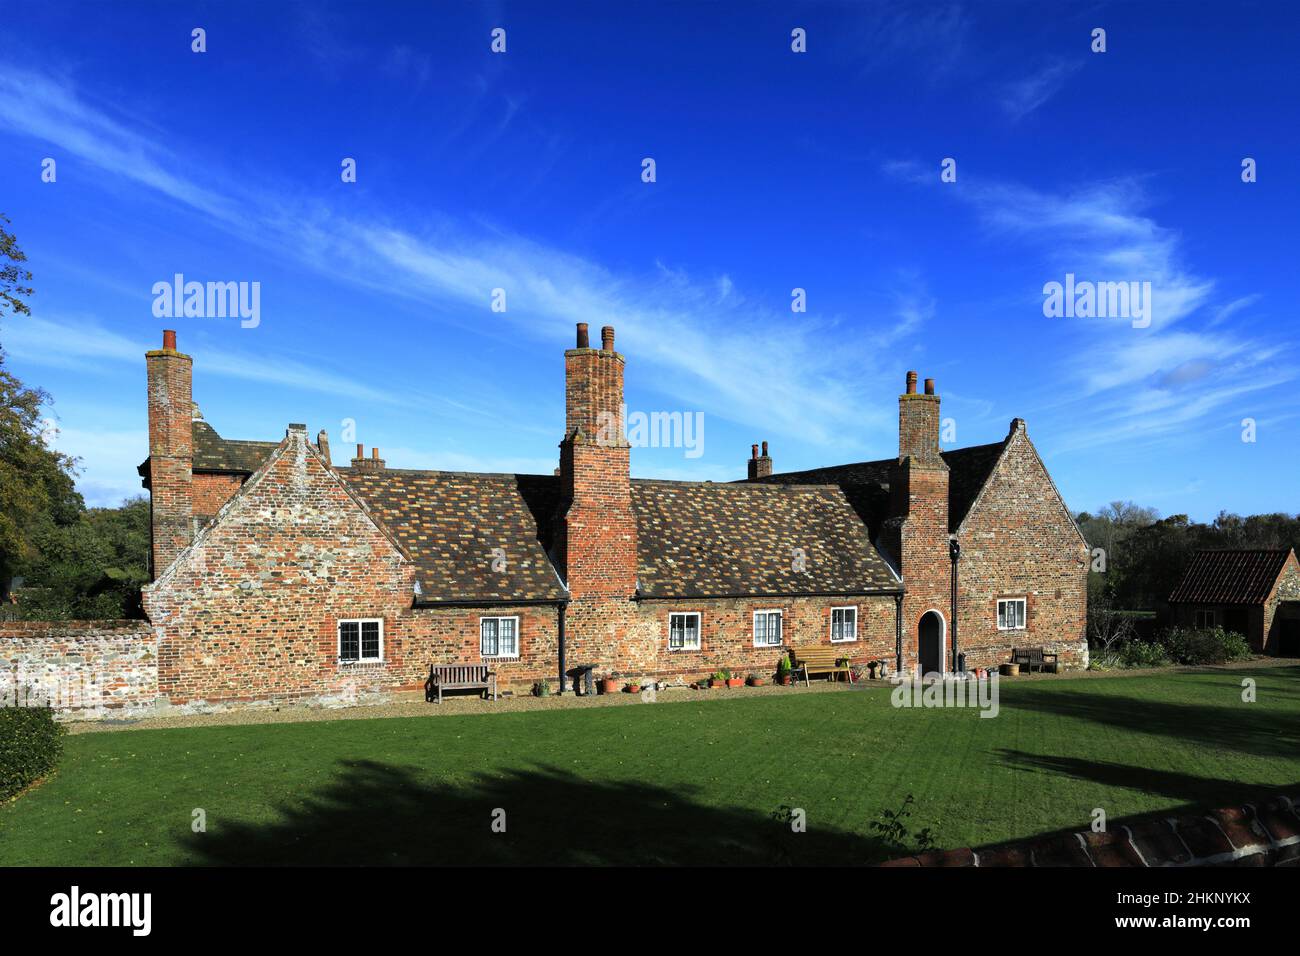 Hospital of the Holy and Undivided Trinity Almshouses, Church of St Lawrence, Castle Rising village, North Norfolk, England, UK Stock Photo